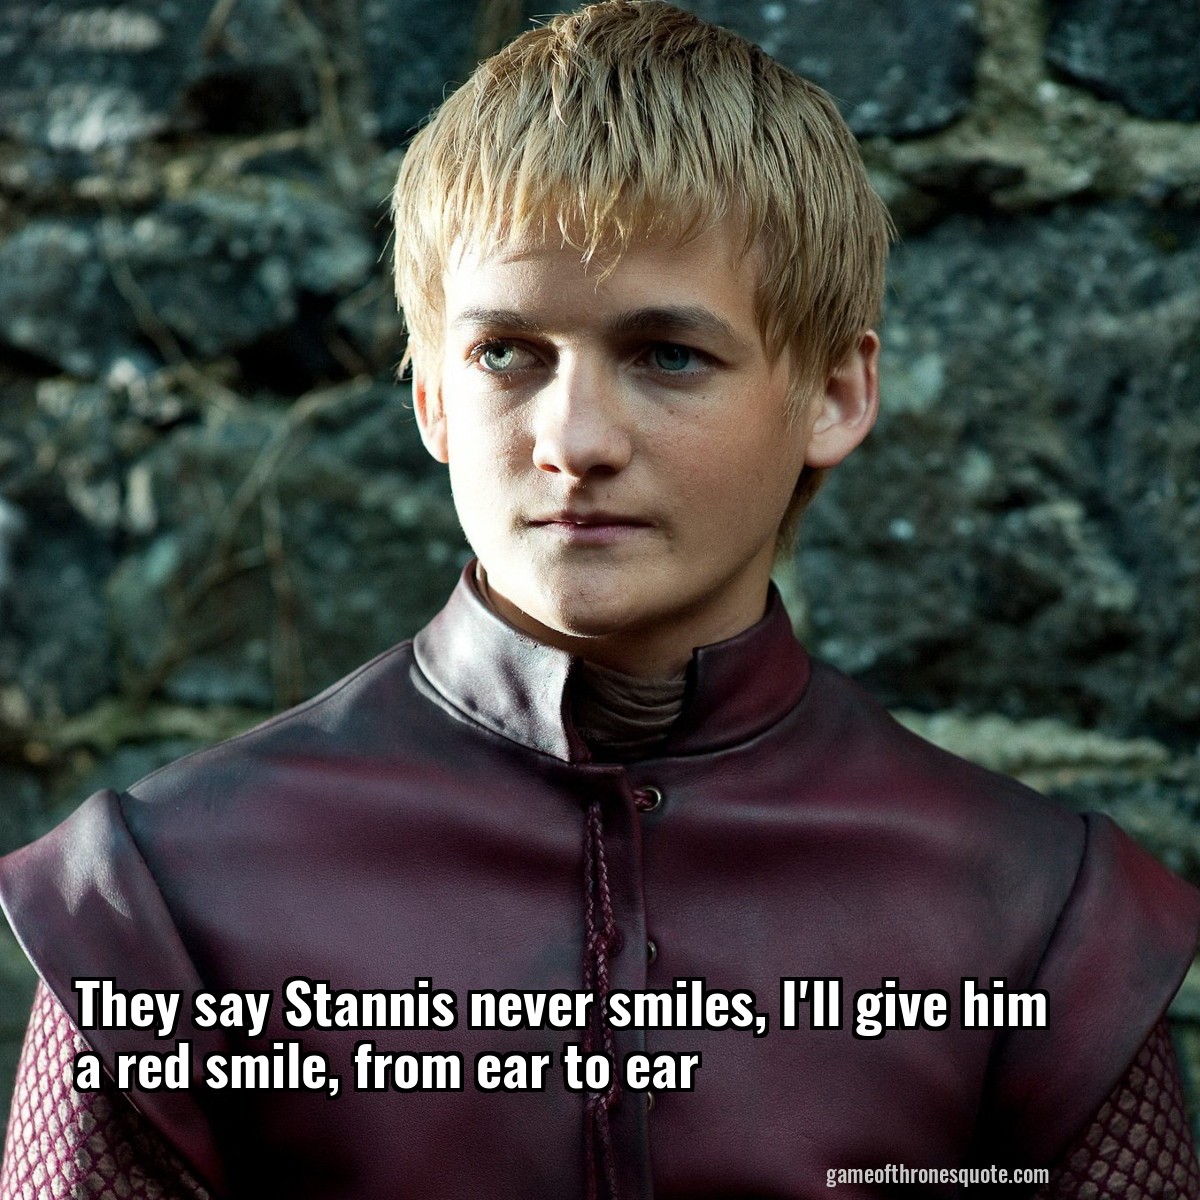 They say Stannis never smiles, I'll give him a red smile, from ear to ear